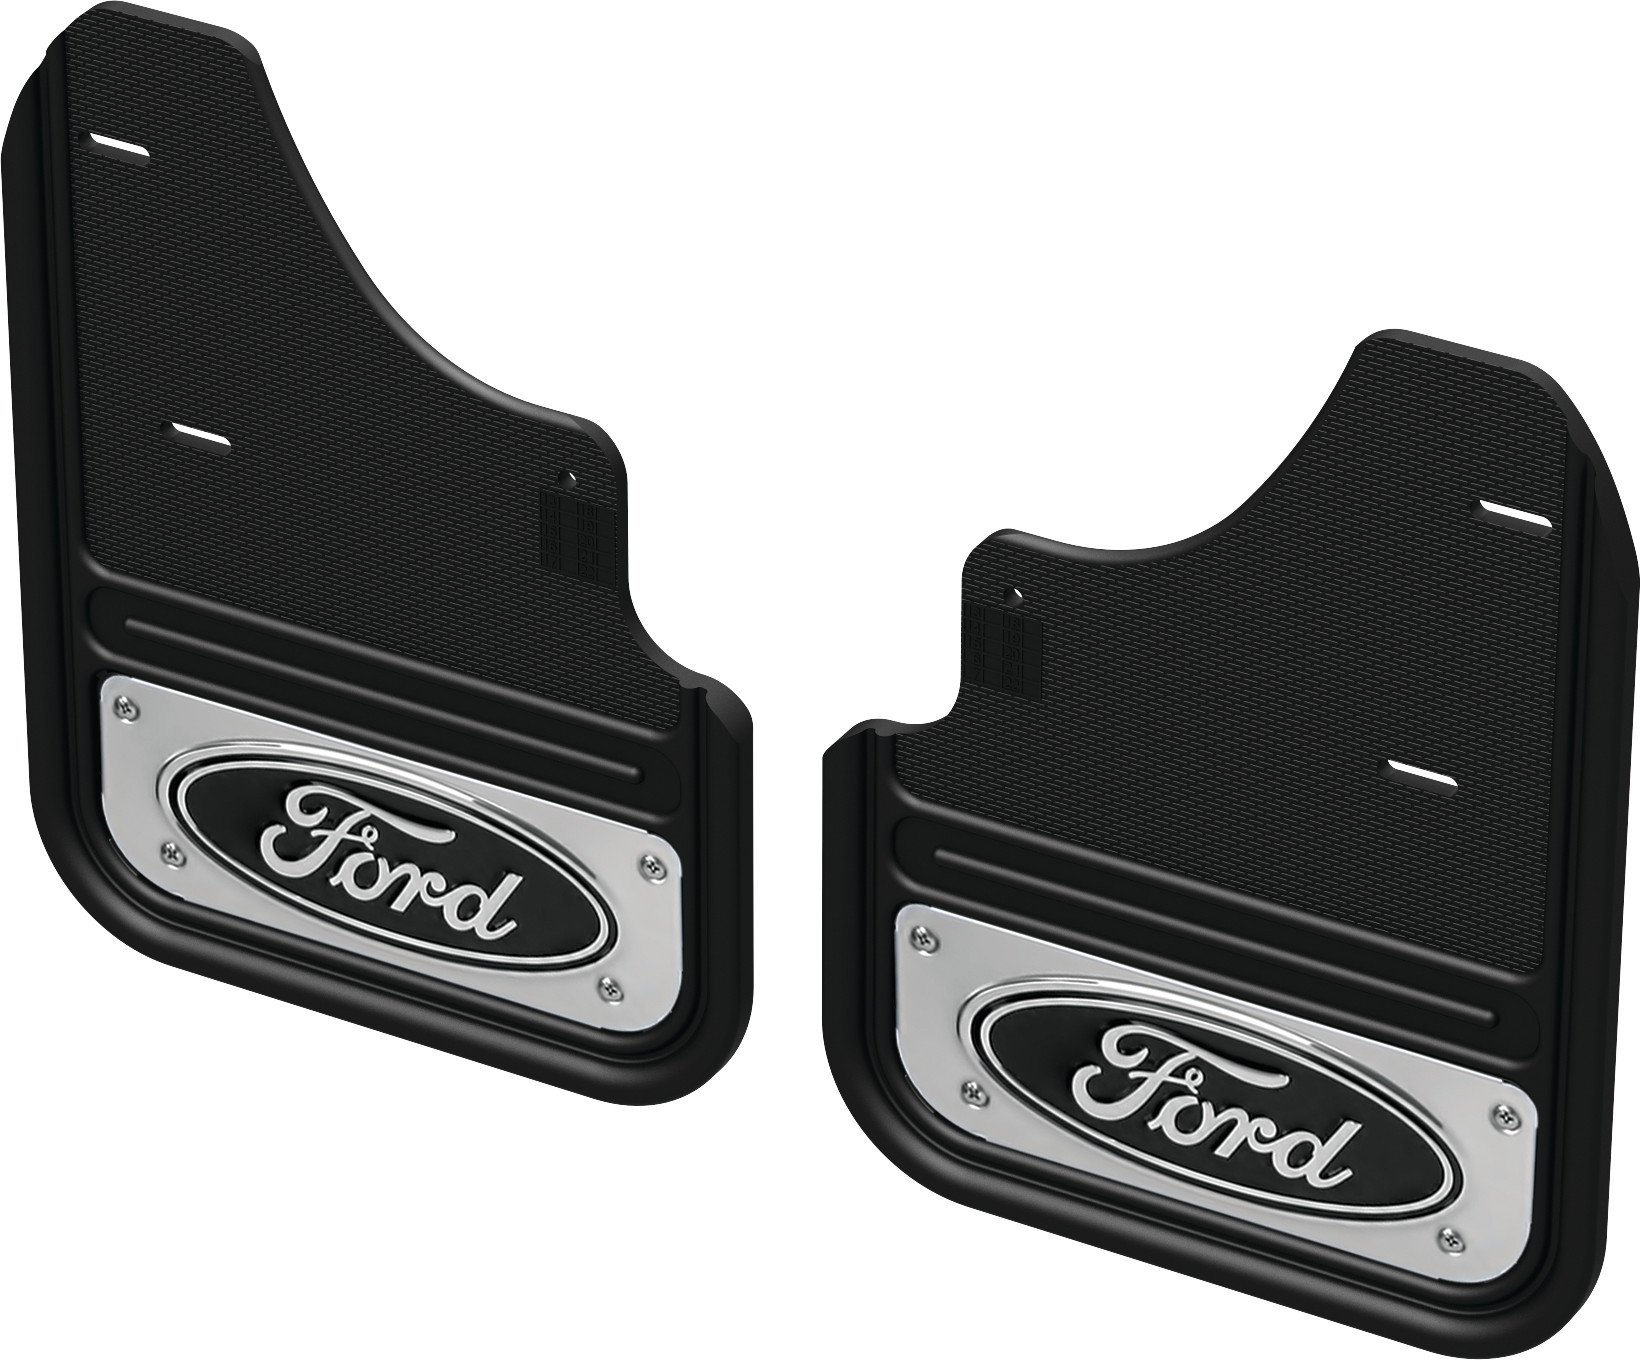 install 2019 ford edge front license plate bracket